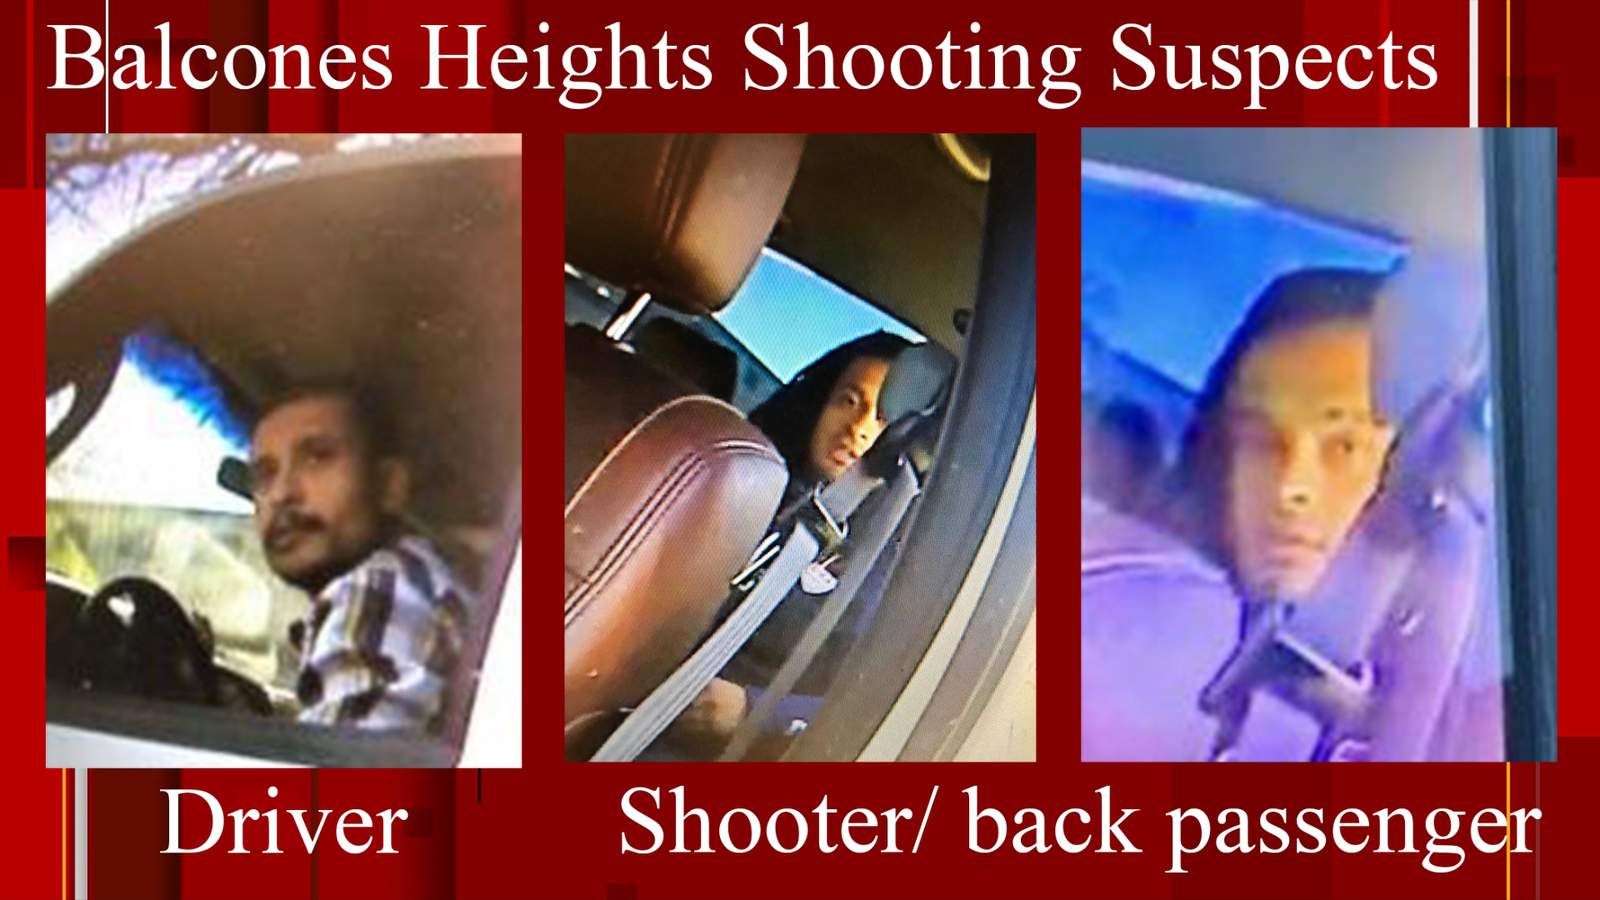 Photos released of Balcones Heights police shooting suspects